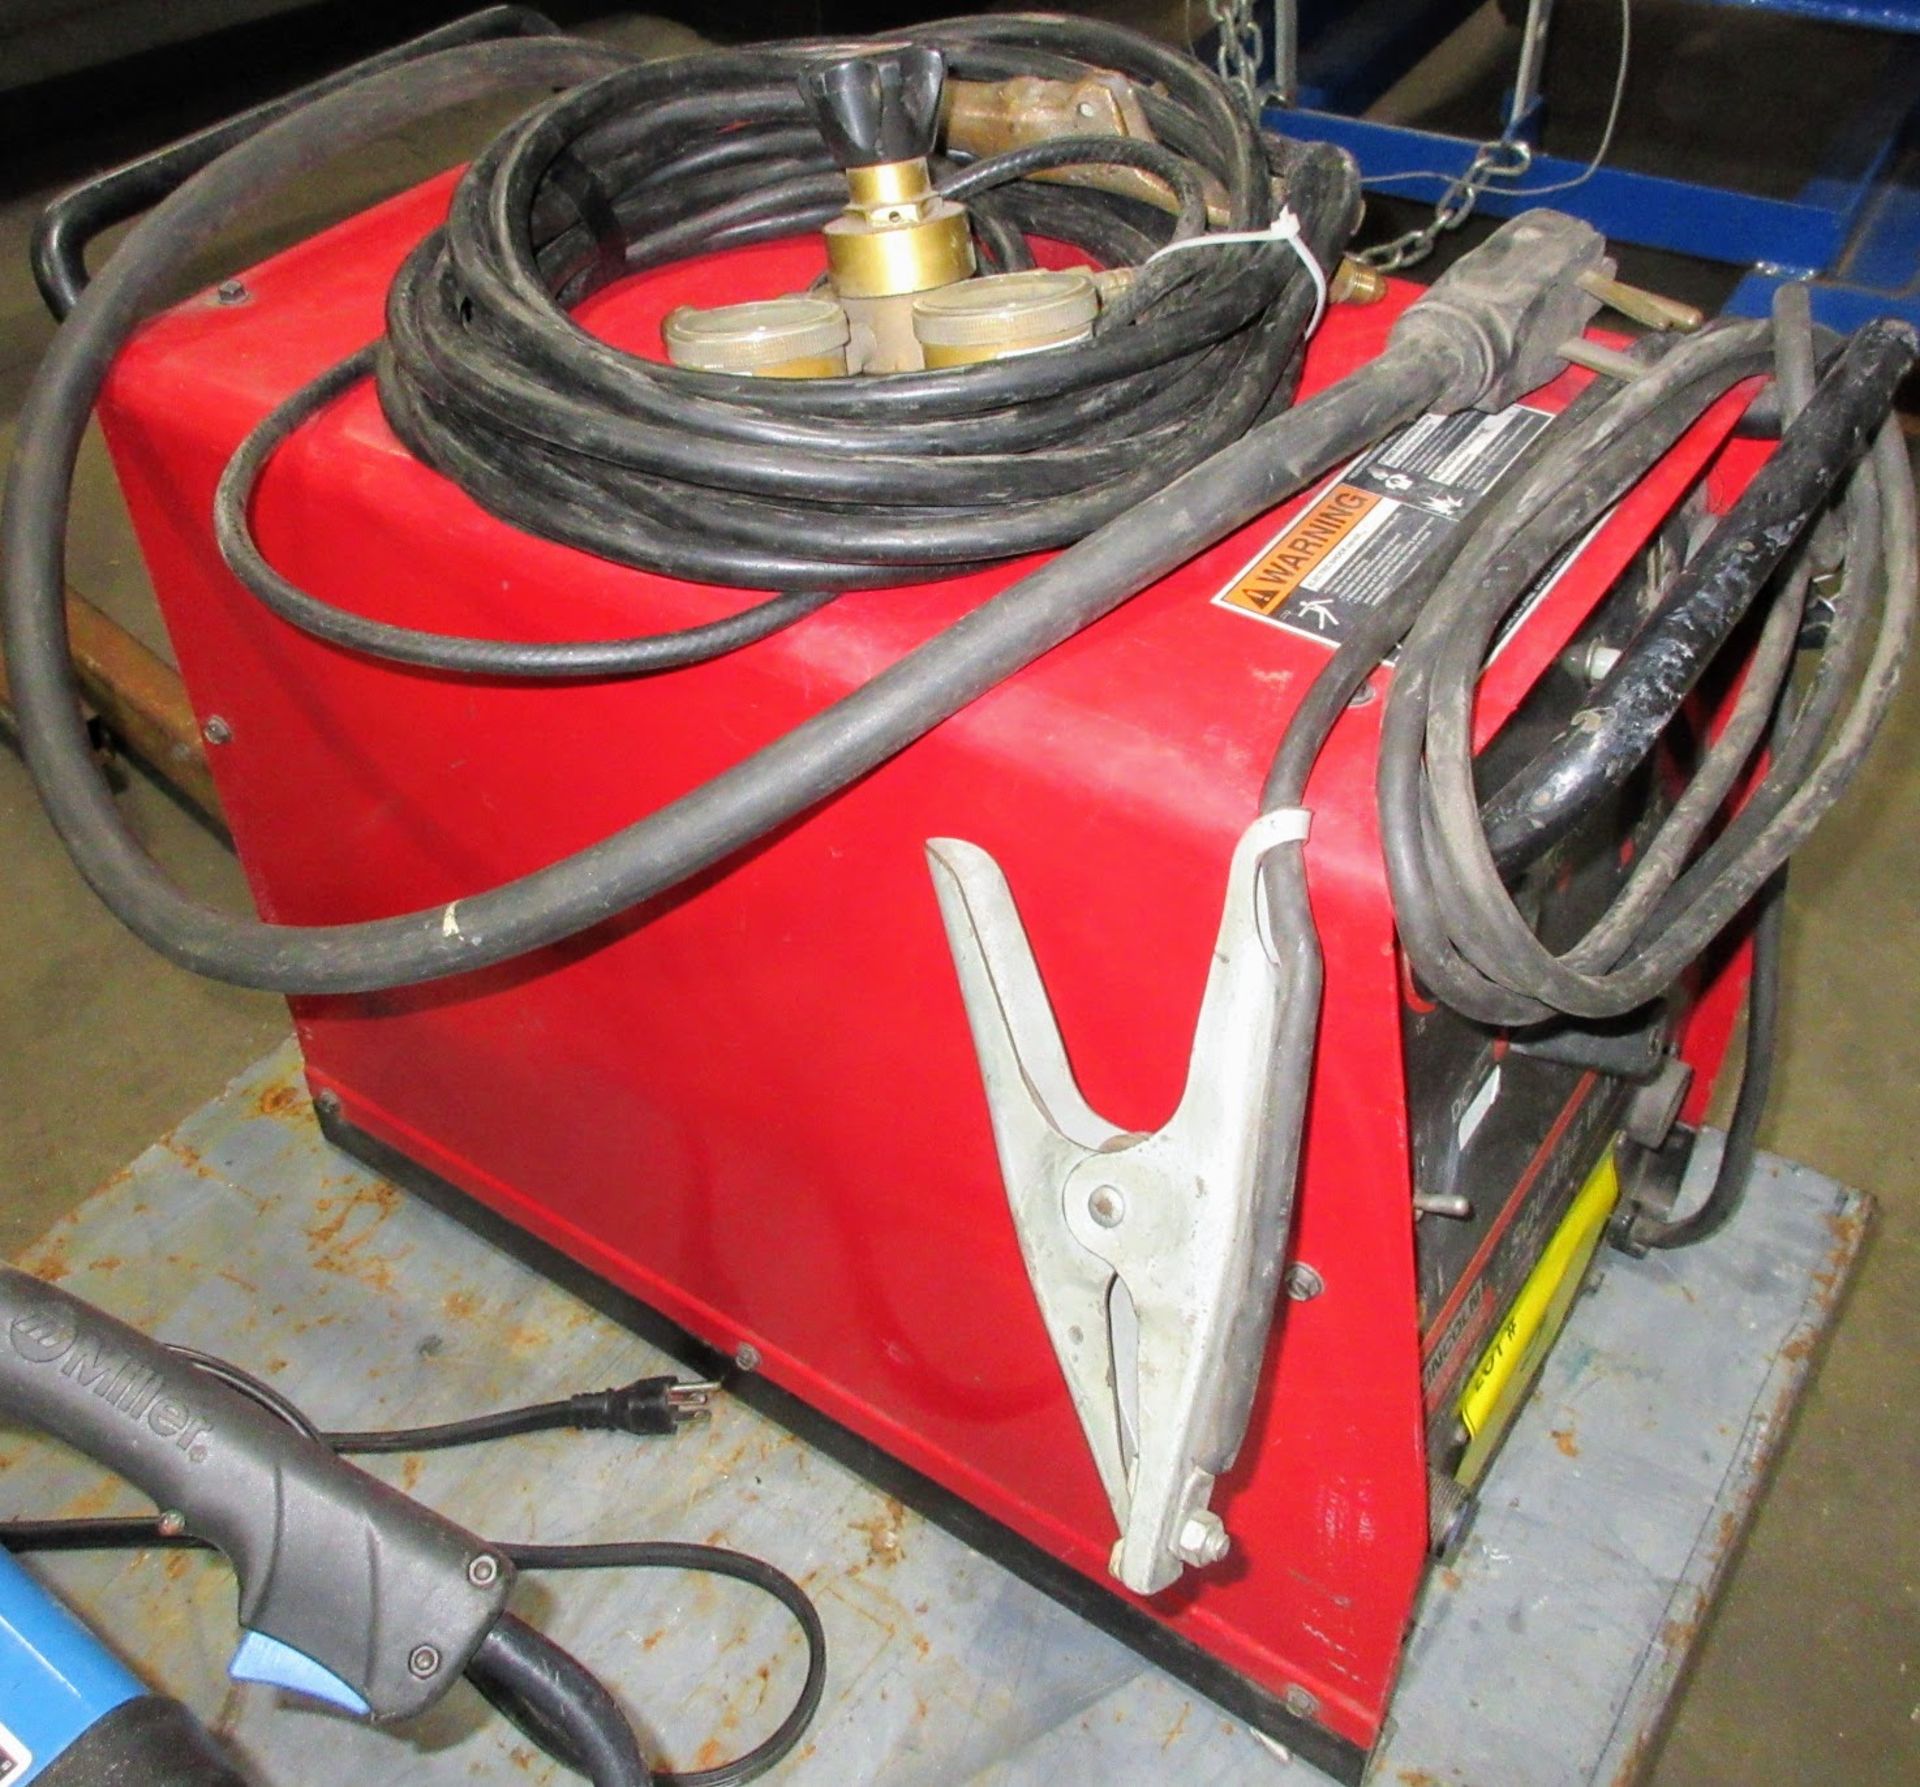 LINCOLN ELECTRIC SQUAREWAVE TIG 175 WELDER W/ CABLES - Image 3 of 4